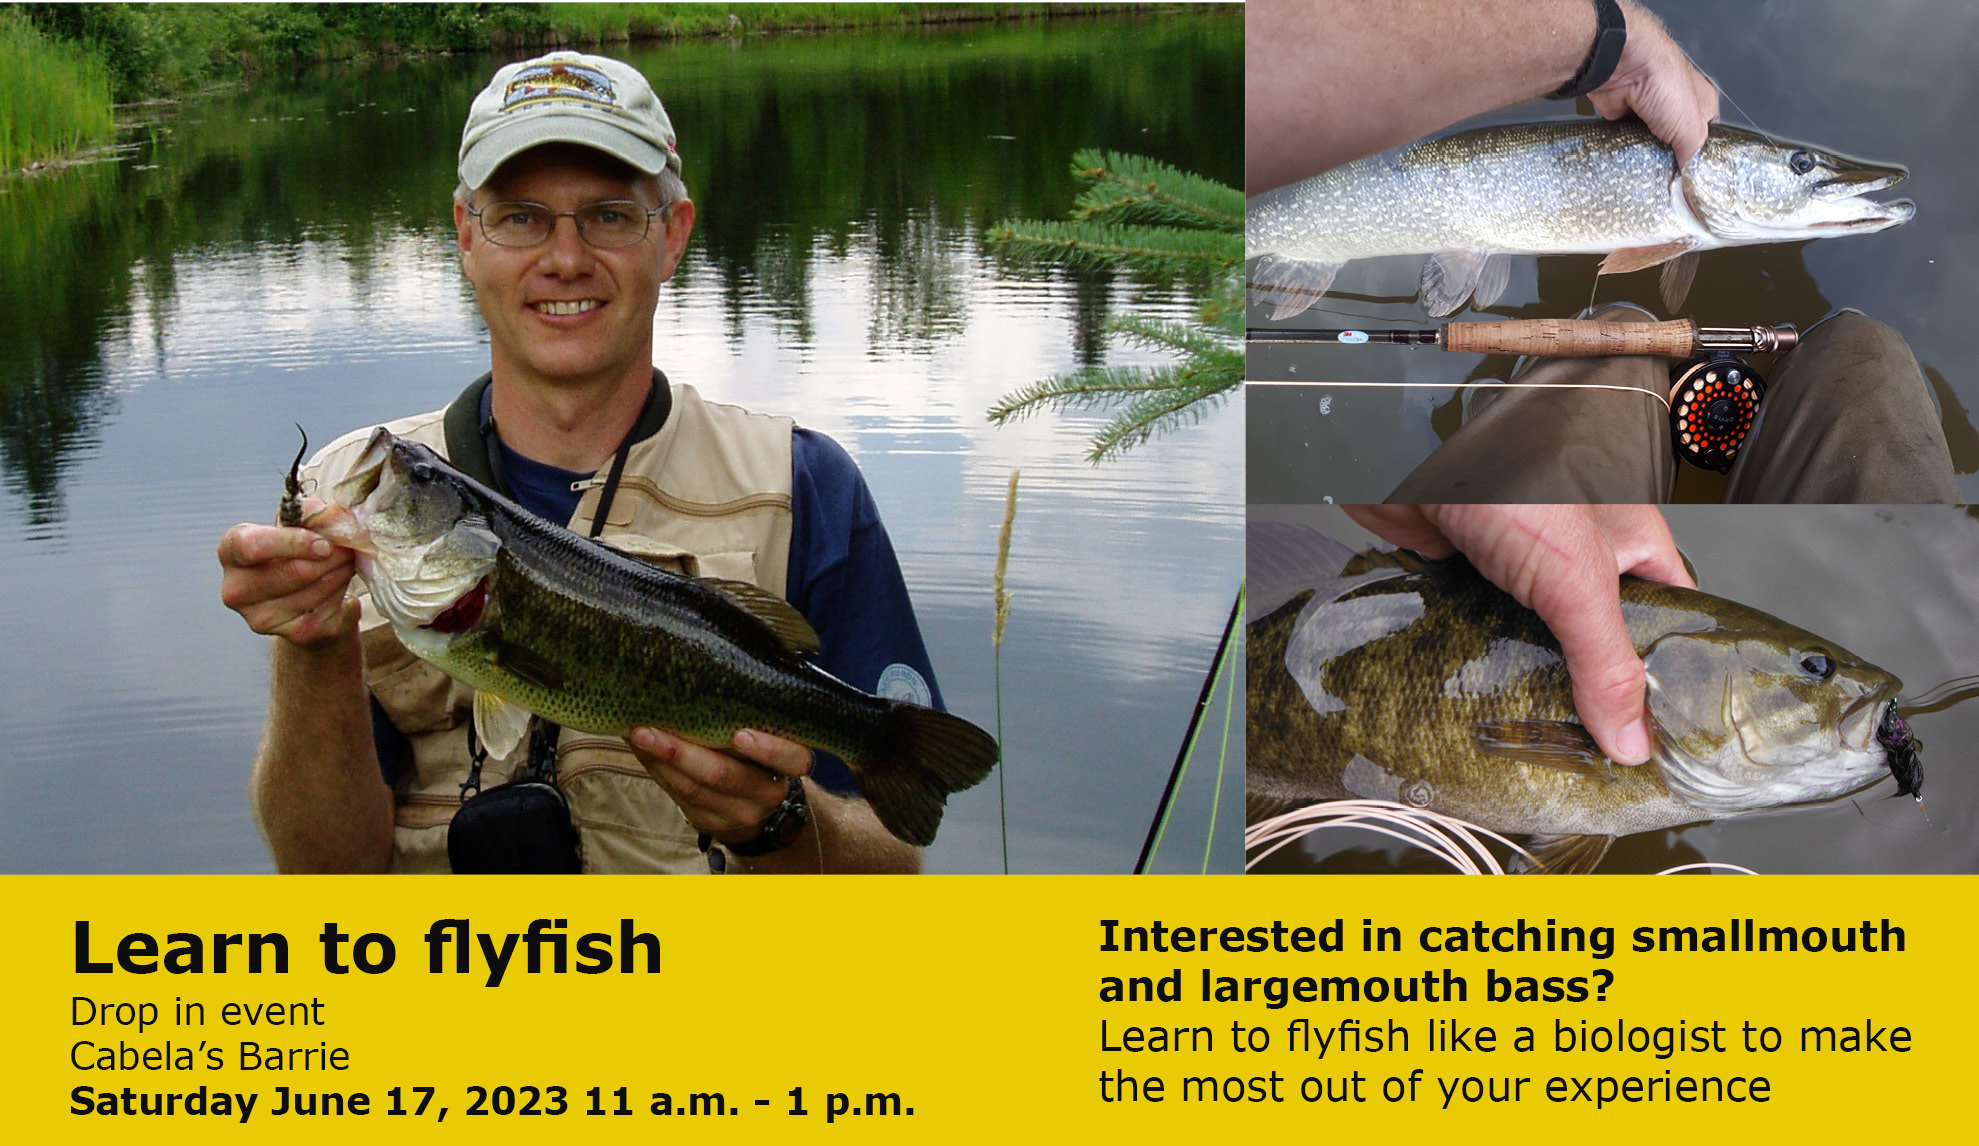 Learn to flyfish like a biologist - The Nottawasaga Valley